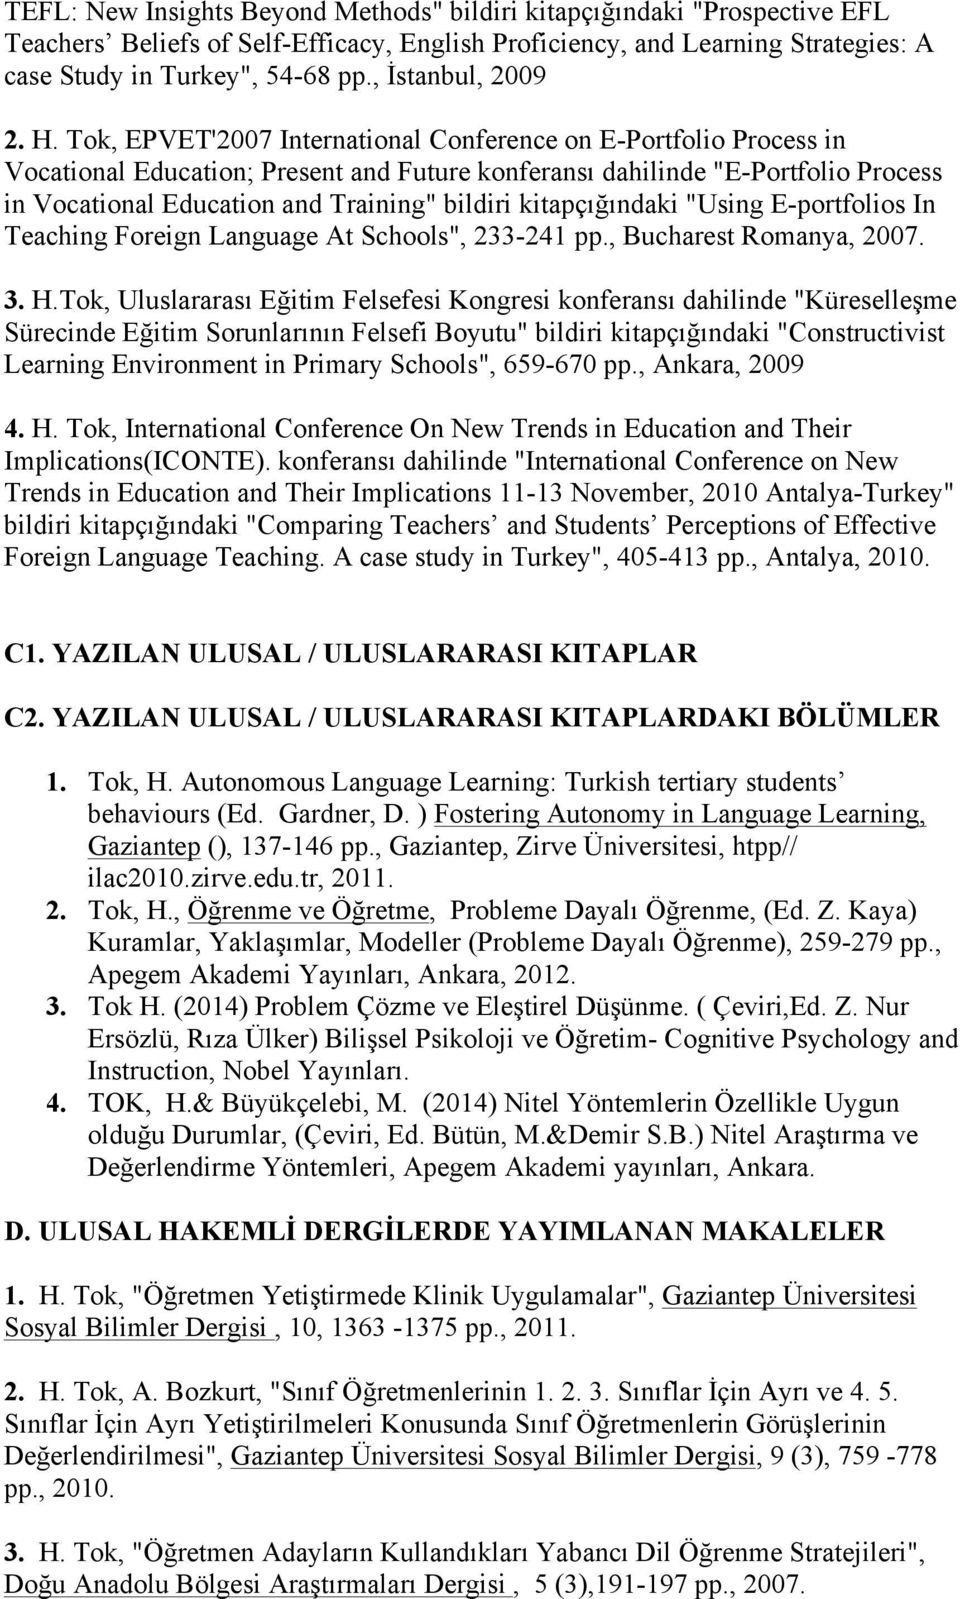 Tok, EPVET'2007 International Conference on E-Portfolio Process in Vocational Education; Present and Future konferansı dahilinde "E-Portfolio Process in Vocational Education and Training" bildiri